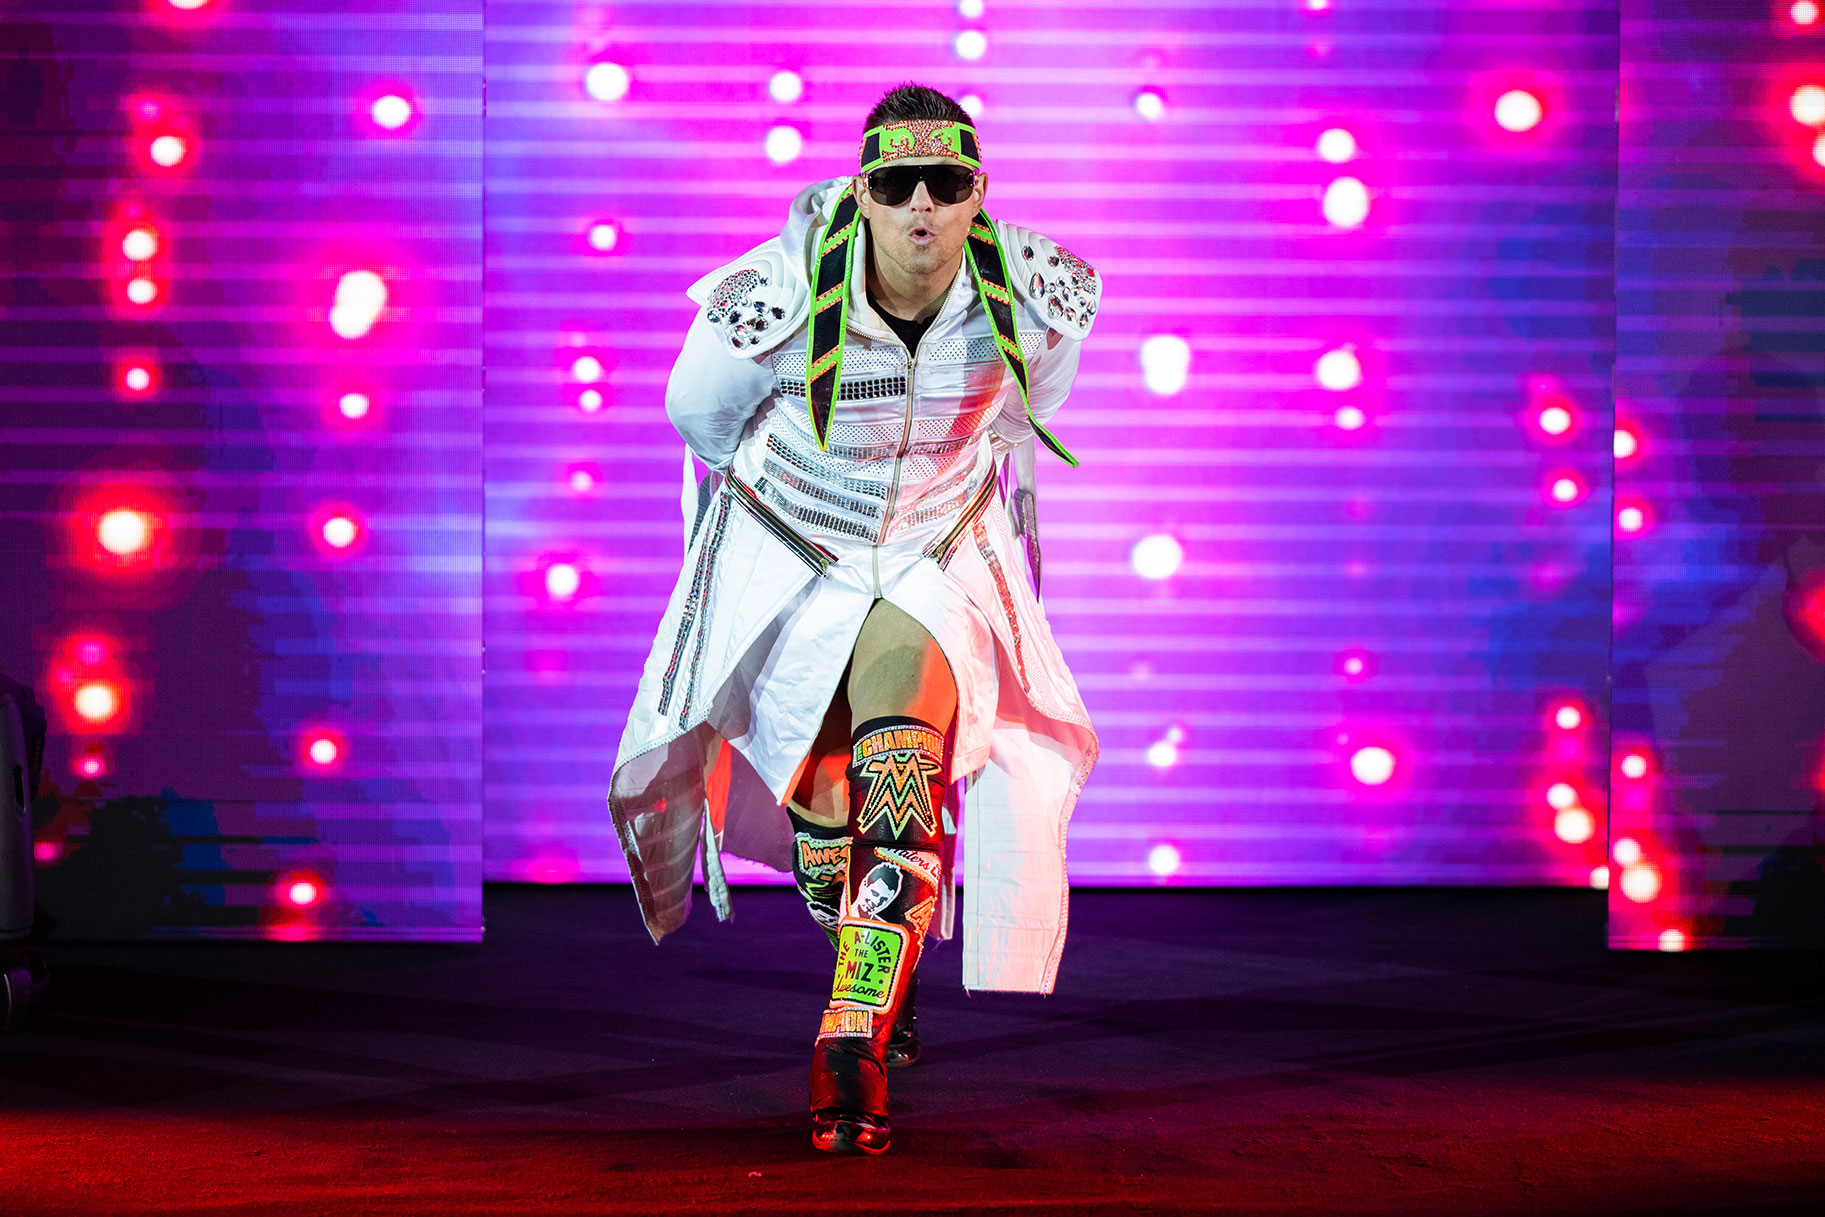 The Miz Speaks About the Ups and Downs of His WWE Career: "I'm Completely Indestructible"